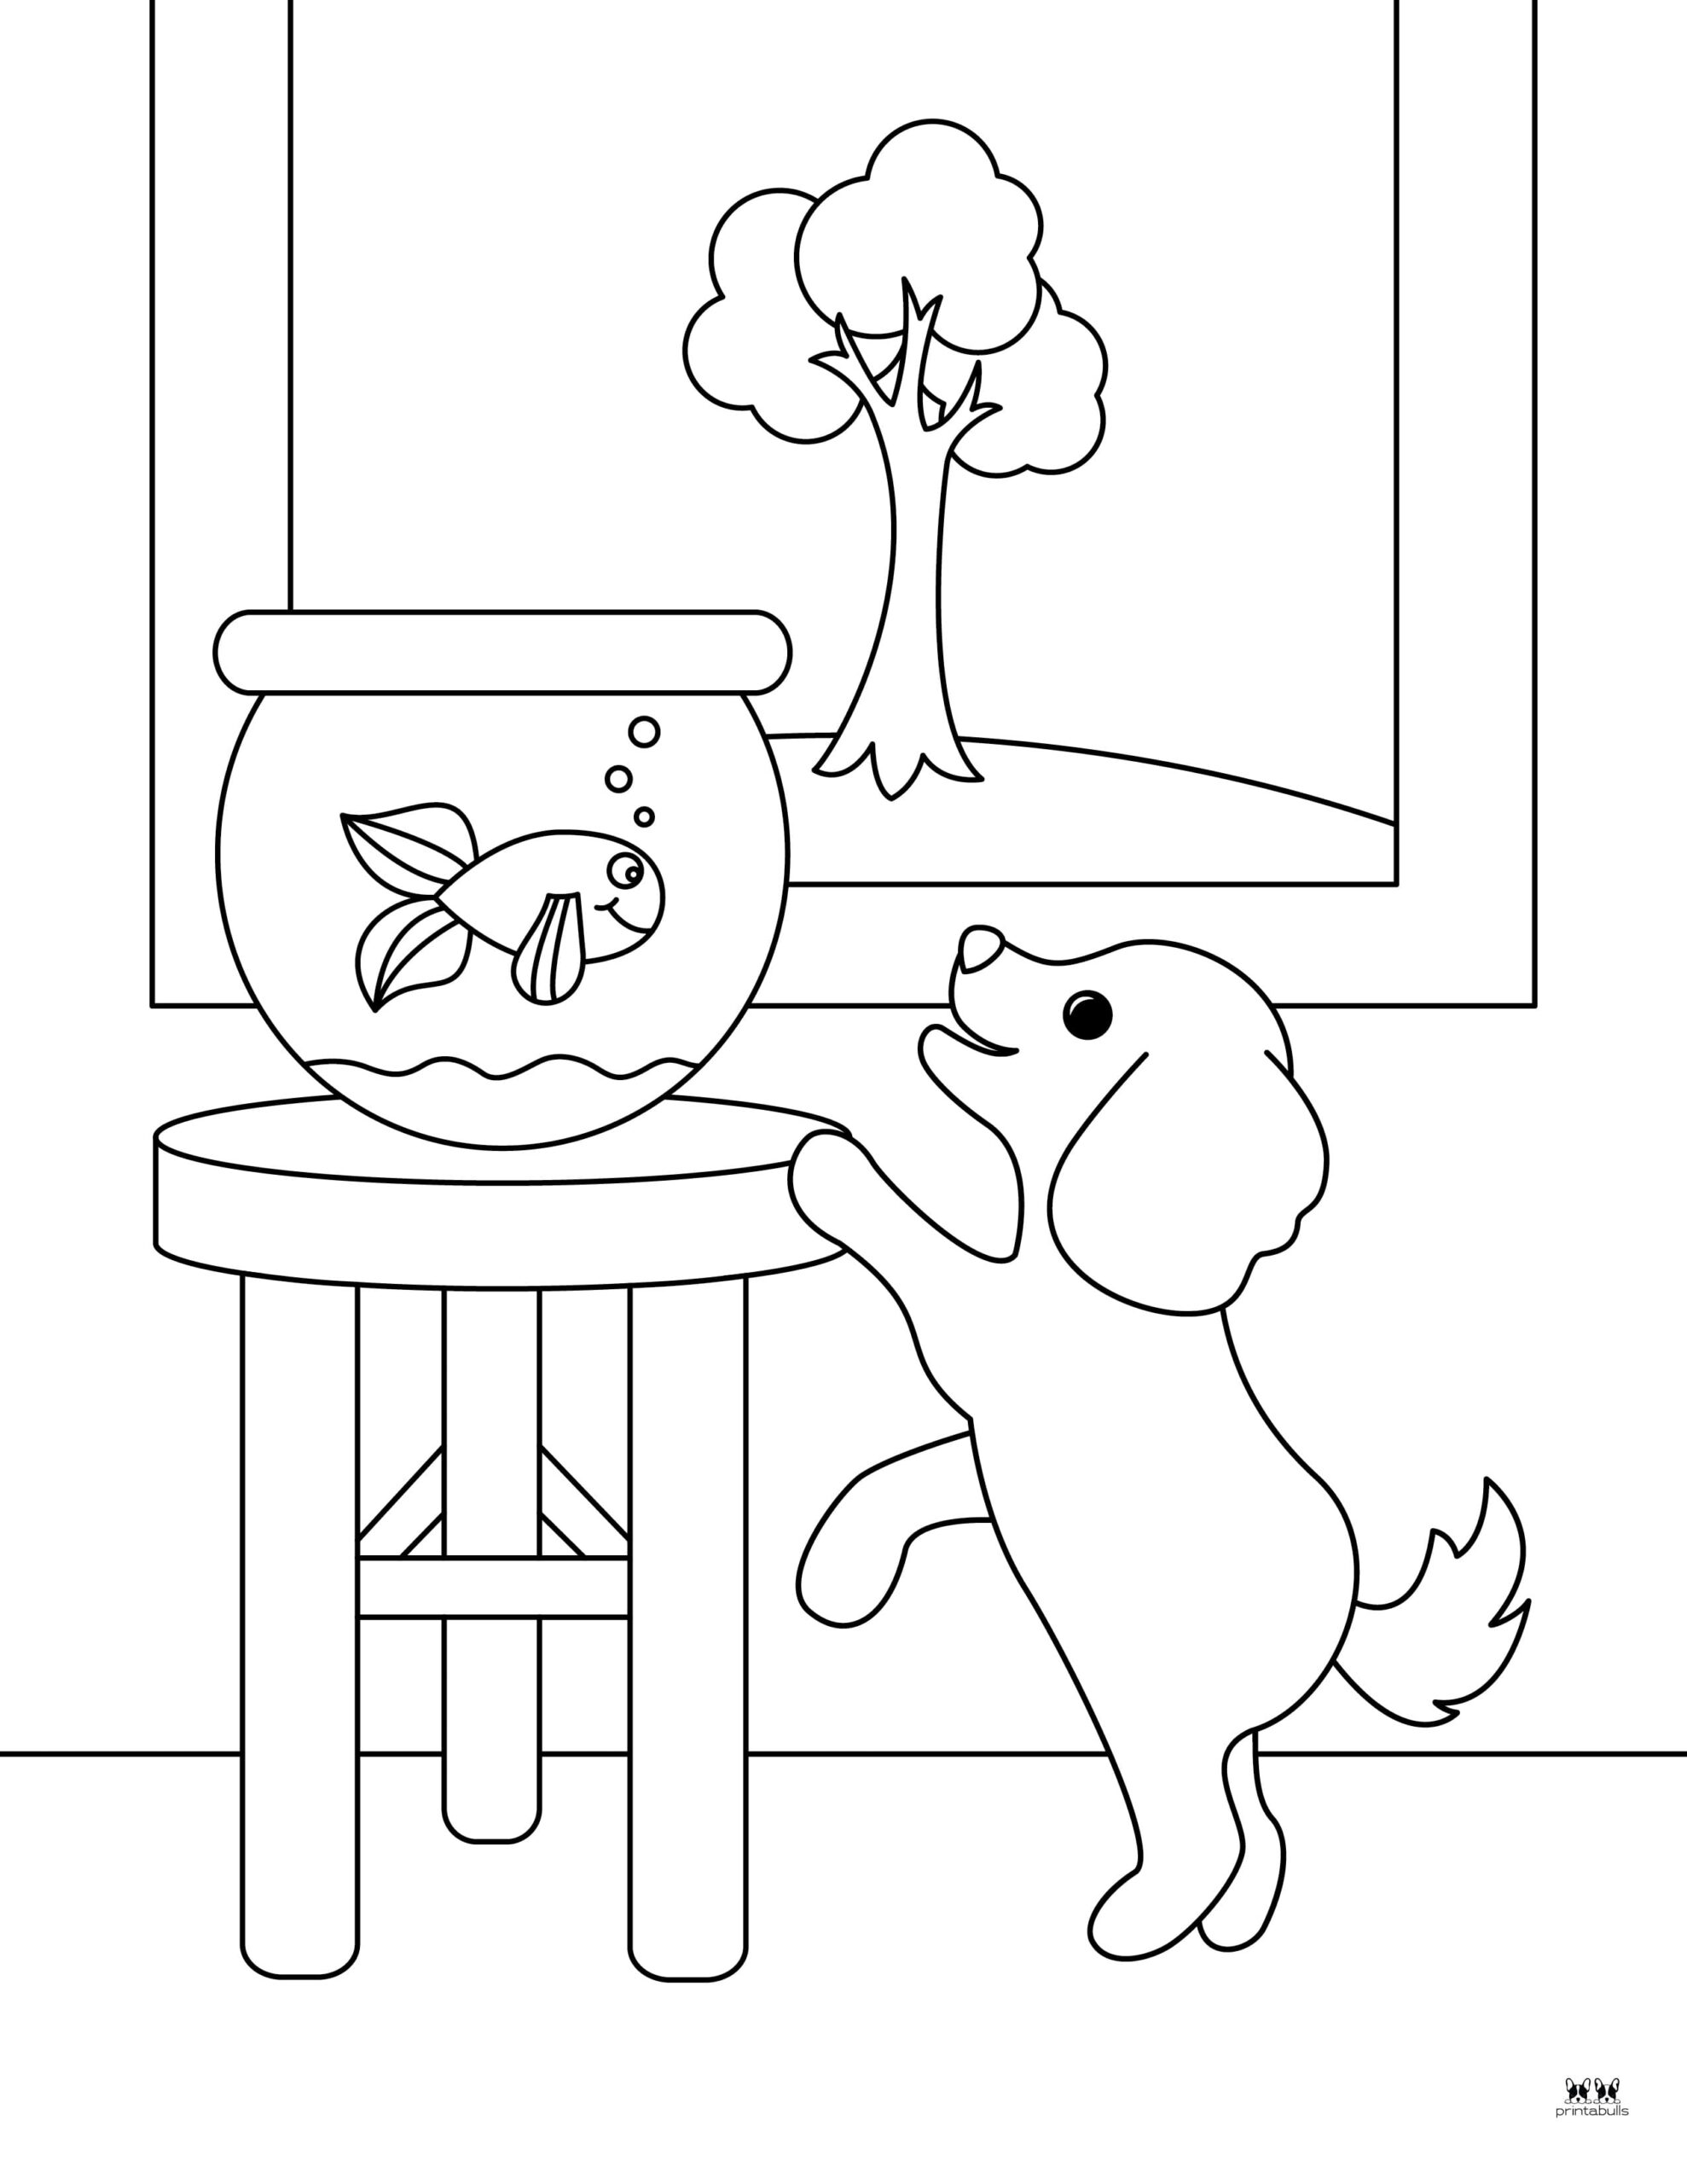 Puppy Coloring Pages - 25 FREE Printables | Printabulls